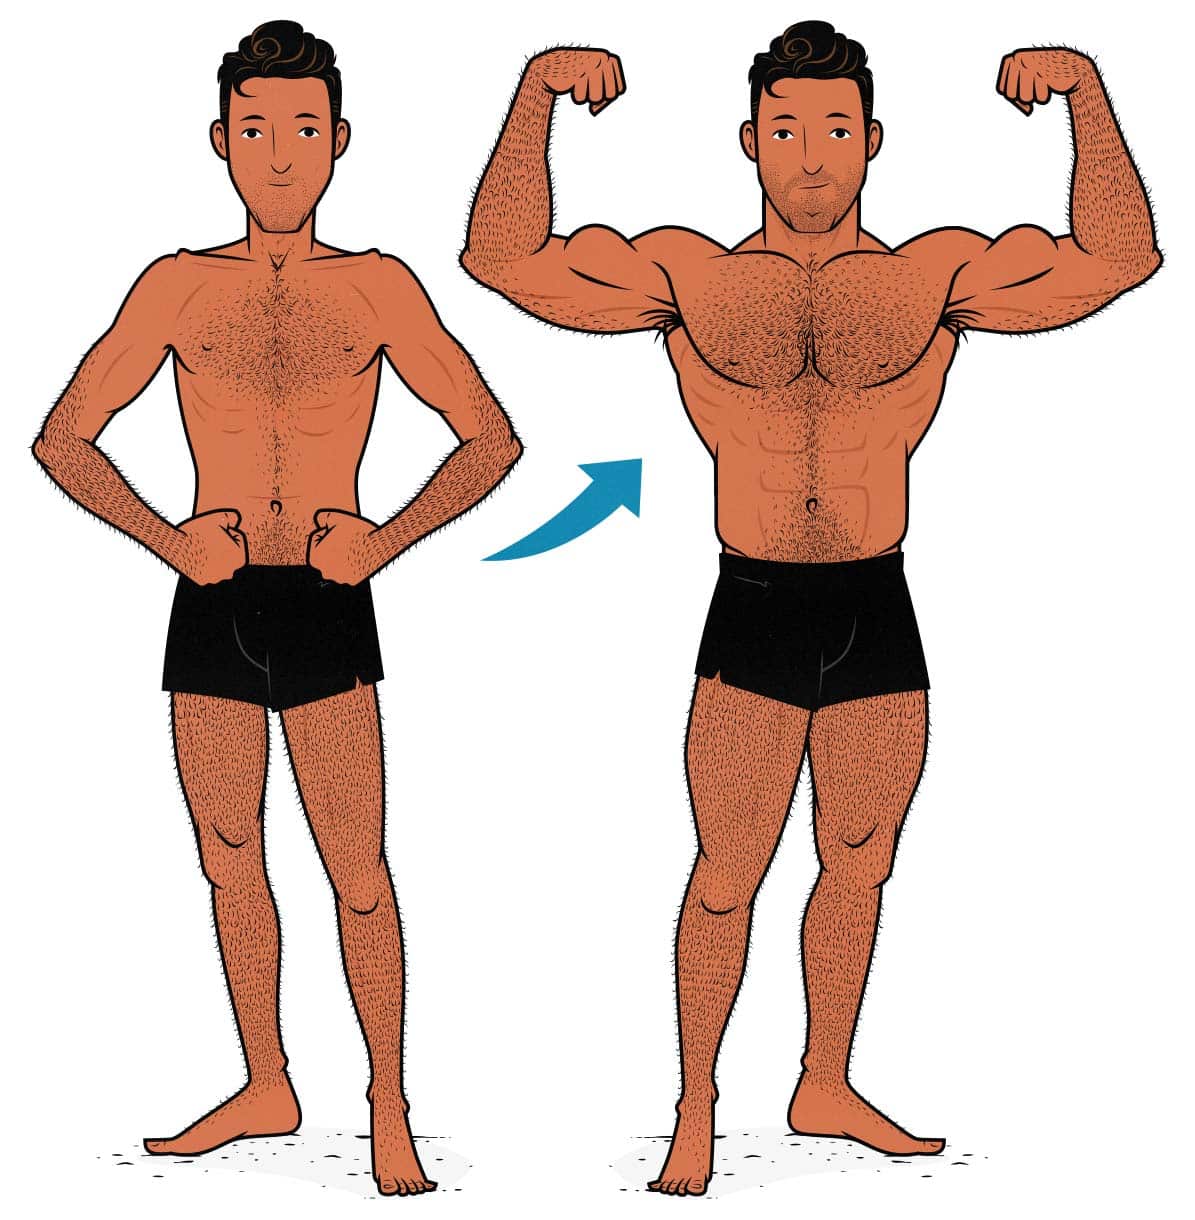 Illustration of a skinny guy bulking up and building muscle.